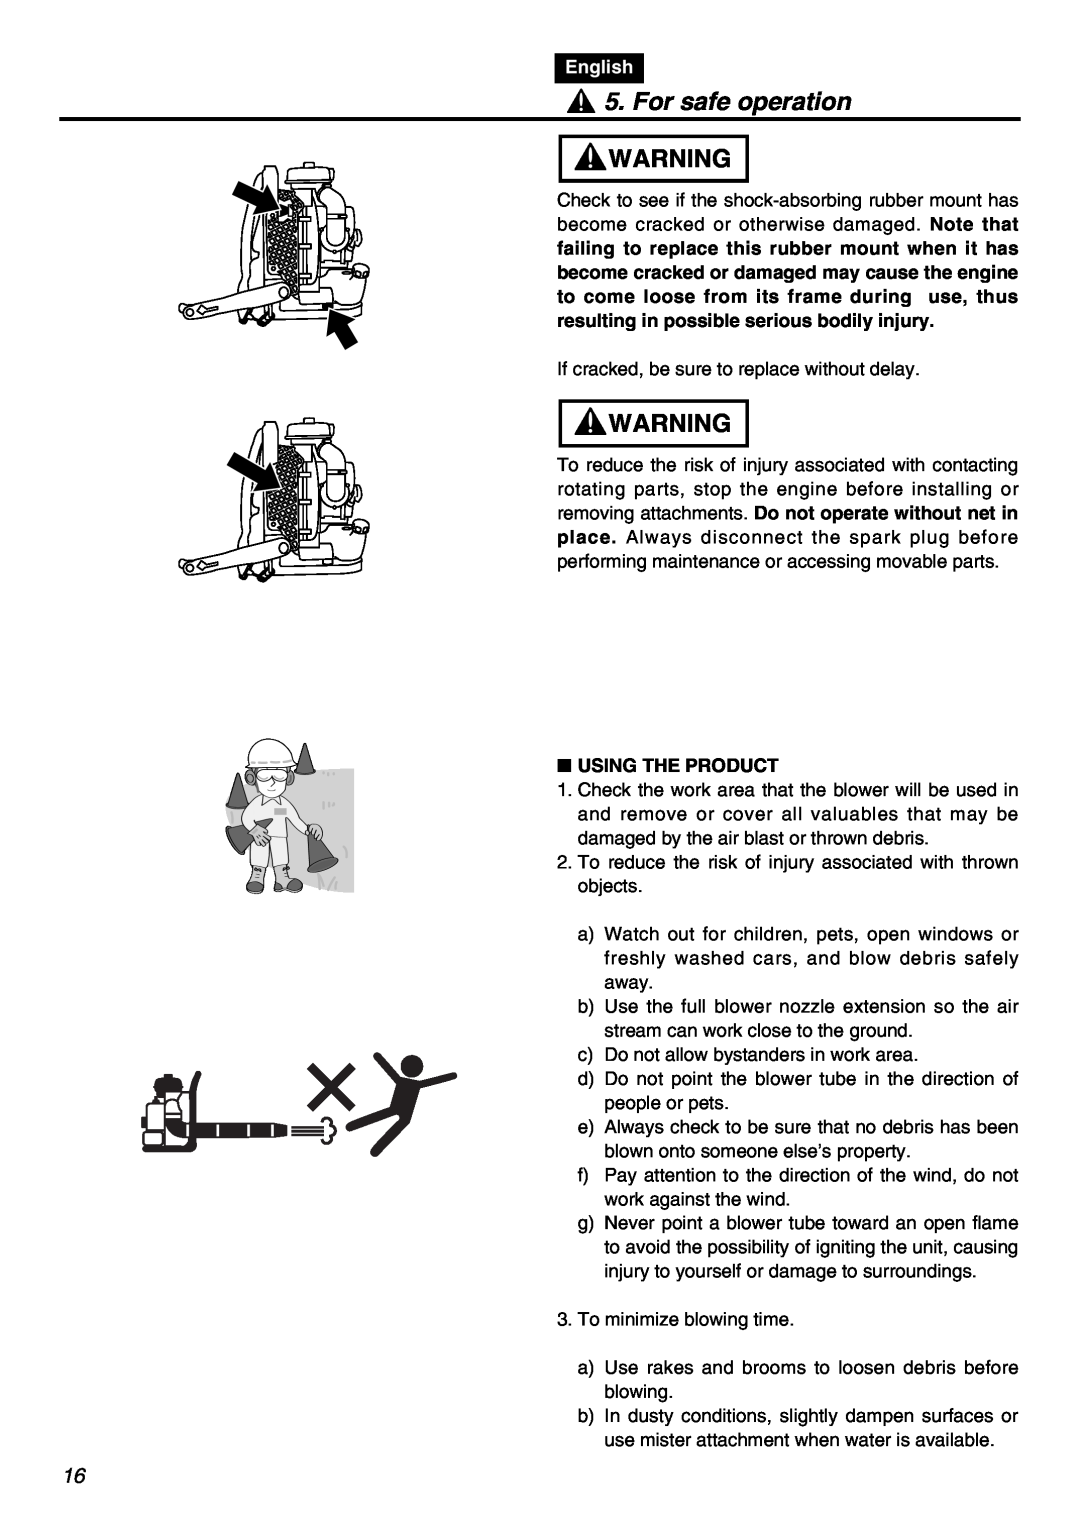 RedMax EBZ7100RH-CA, EBZ7100-CA manual For safe operation, English, Using The Product 